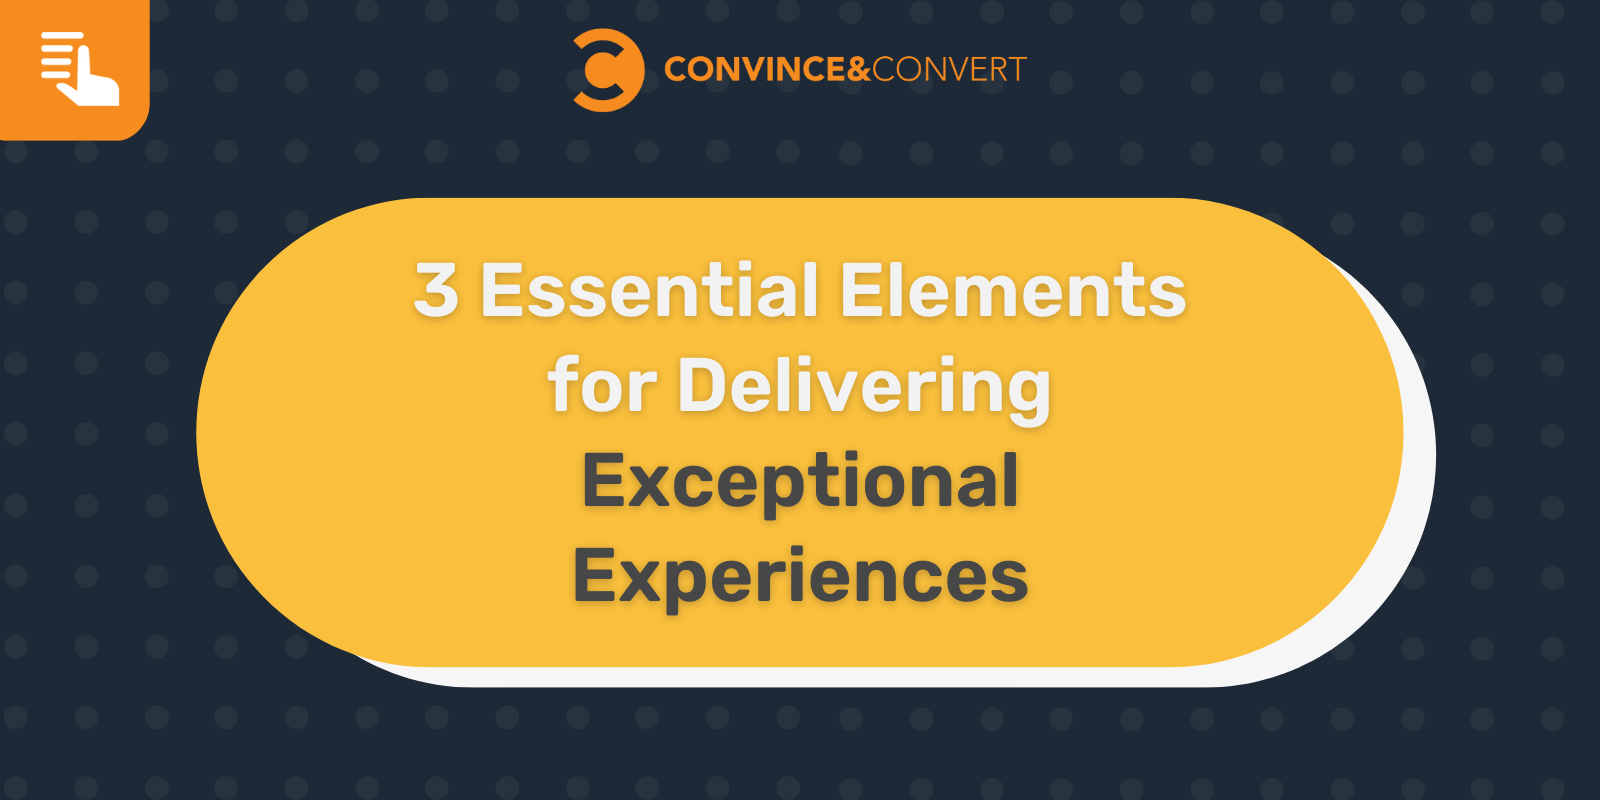 3 Essential Elements for Delivering Exceptional Experiences